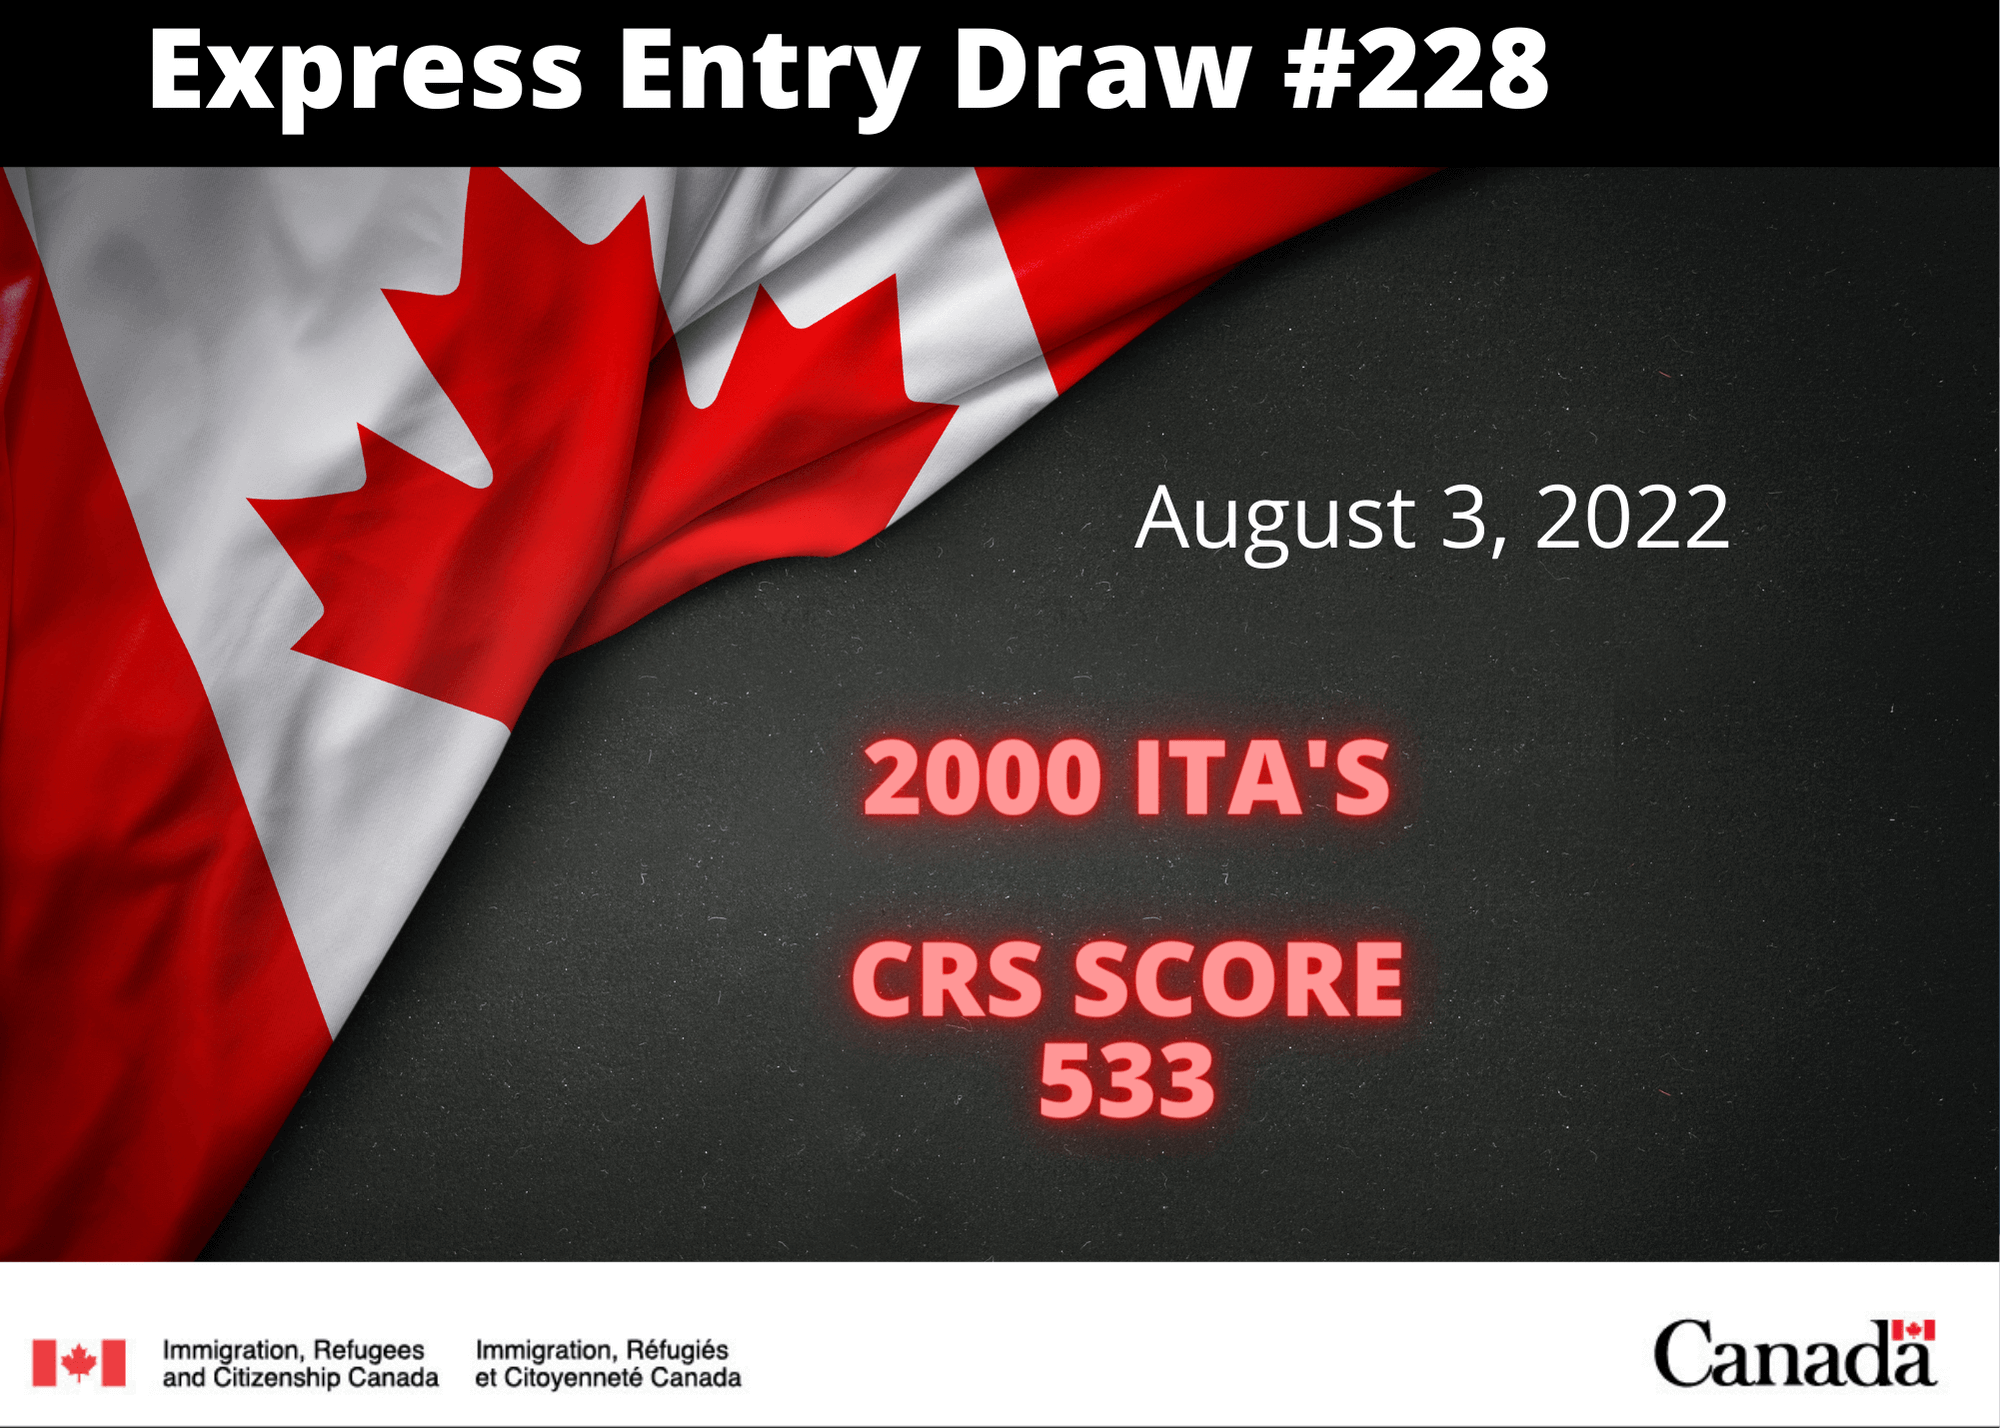 Canada Express Entry Draw #228